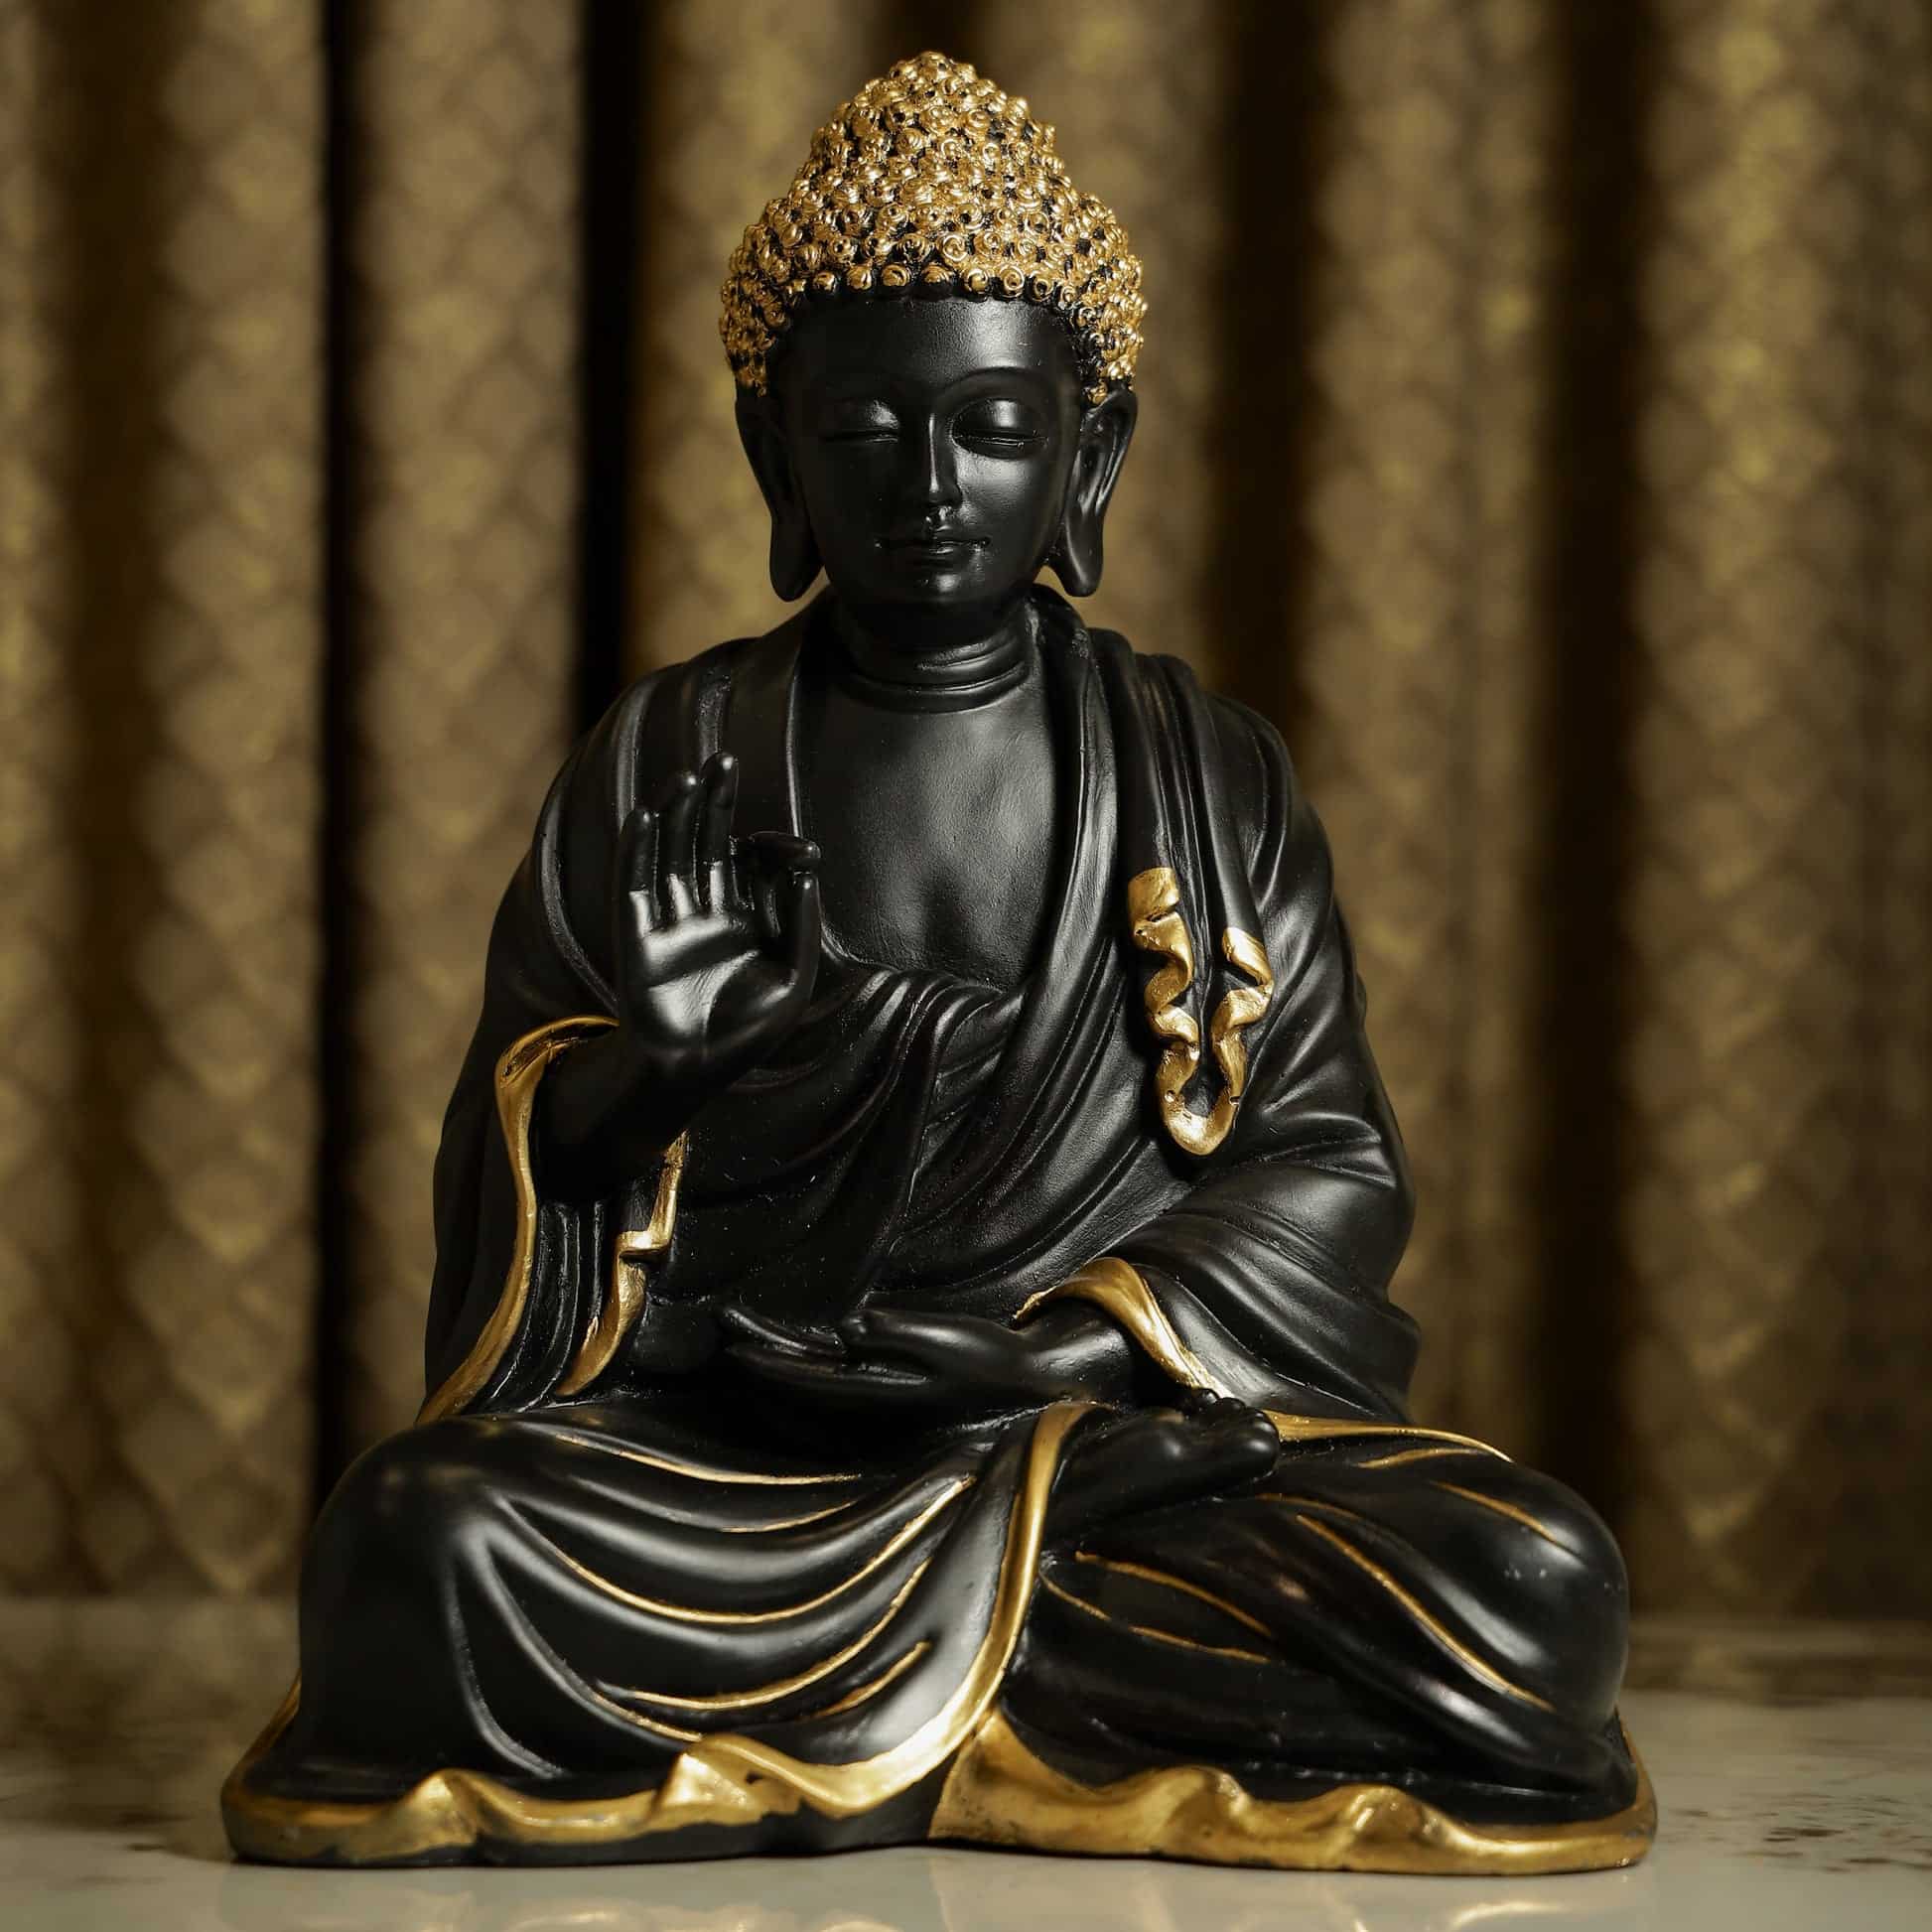 Black and Gold Blessing Buddha Sculpture (1)